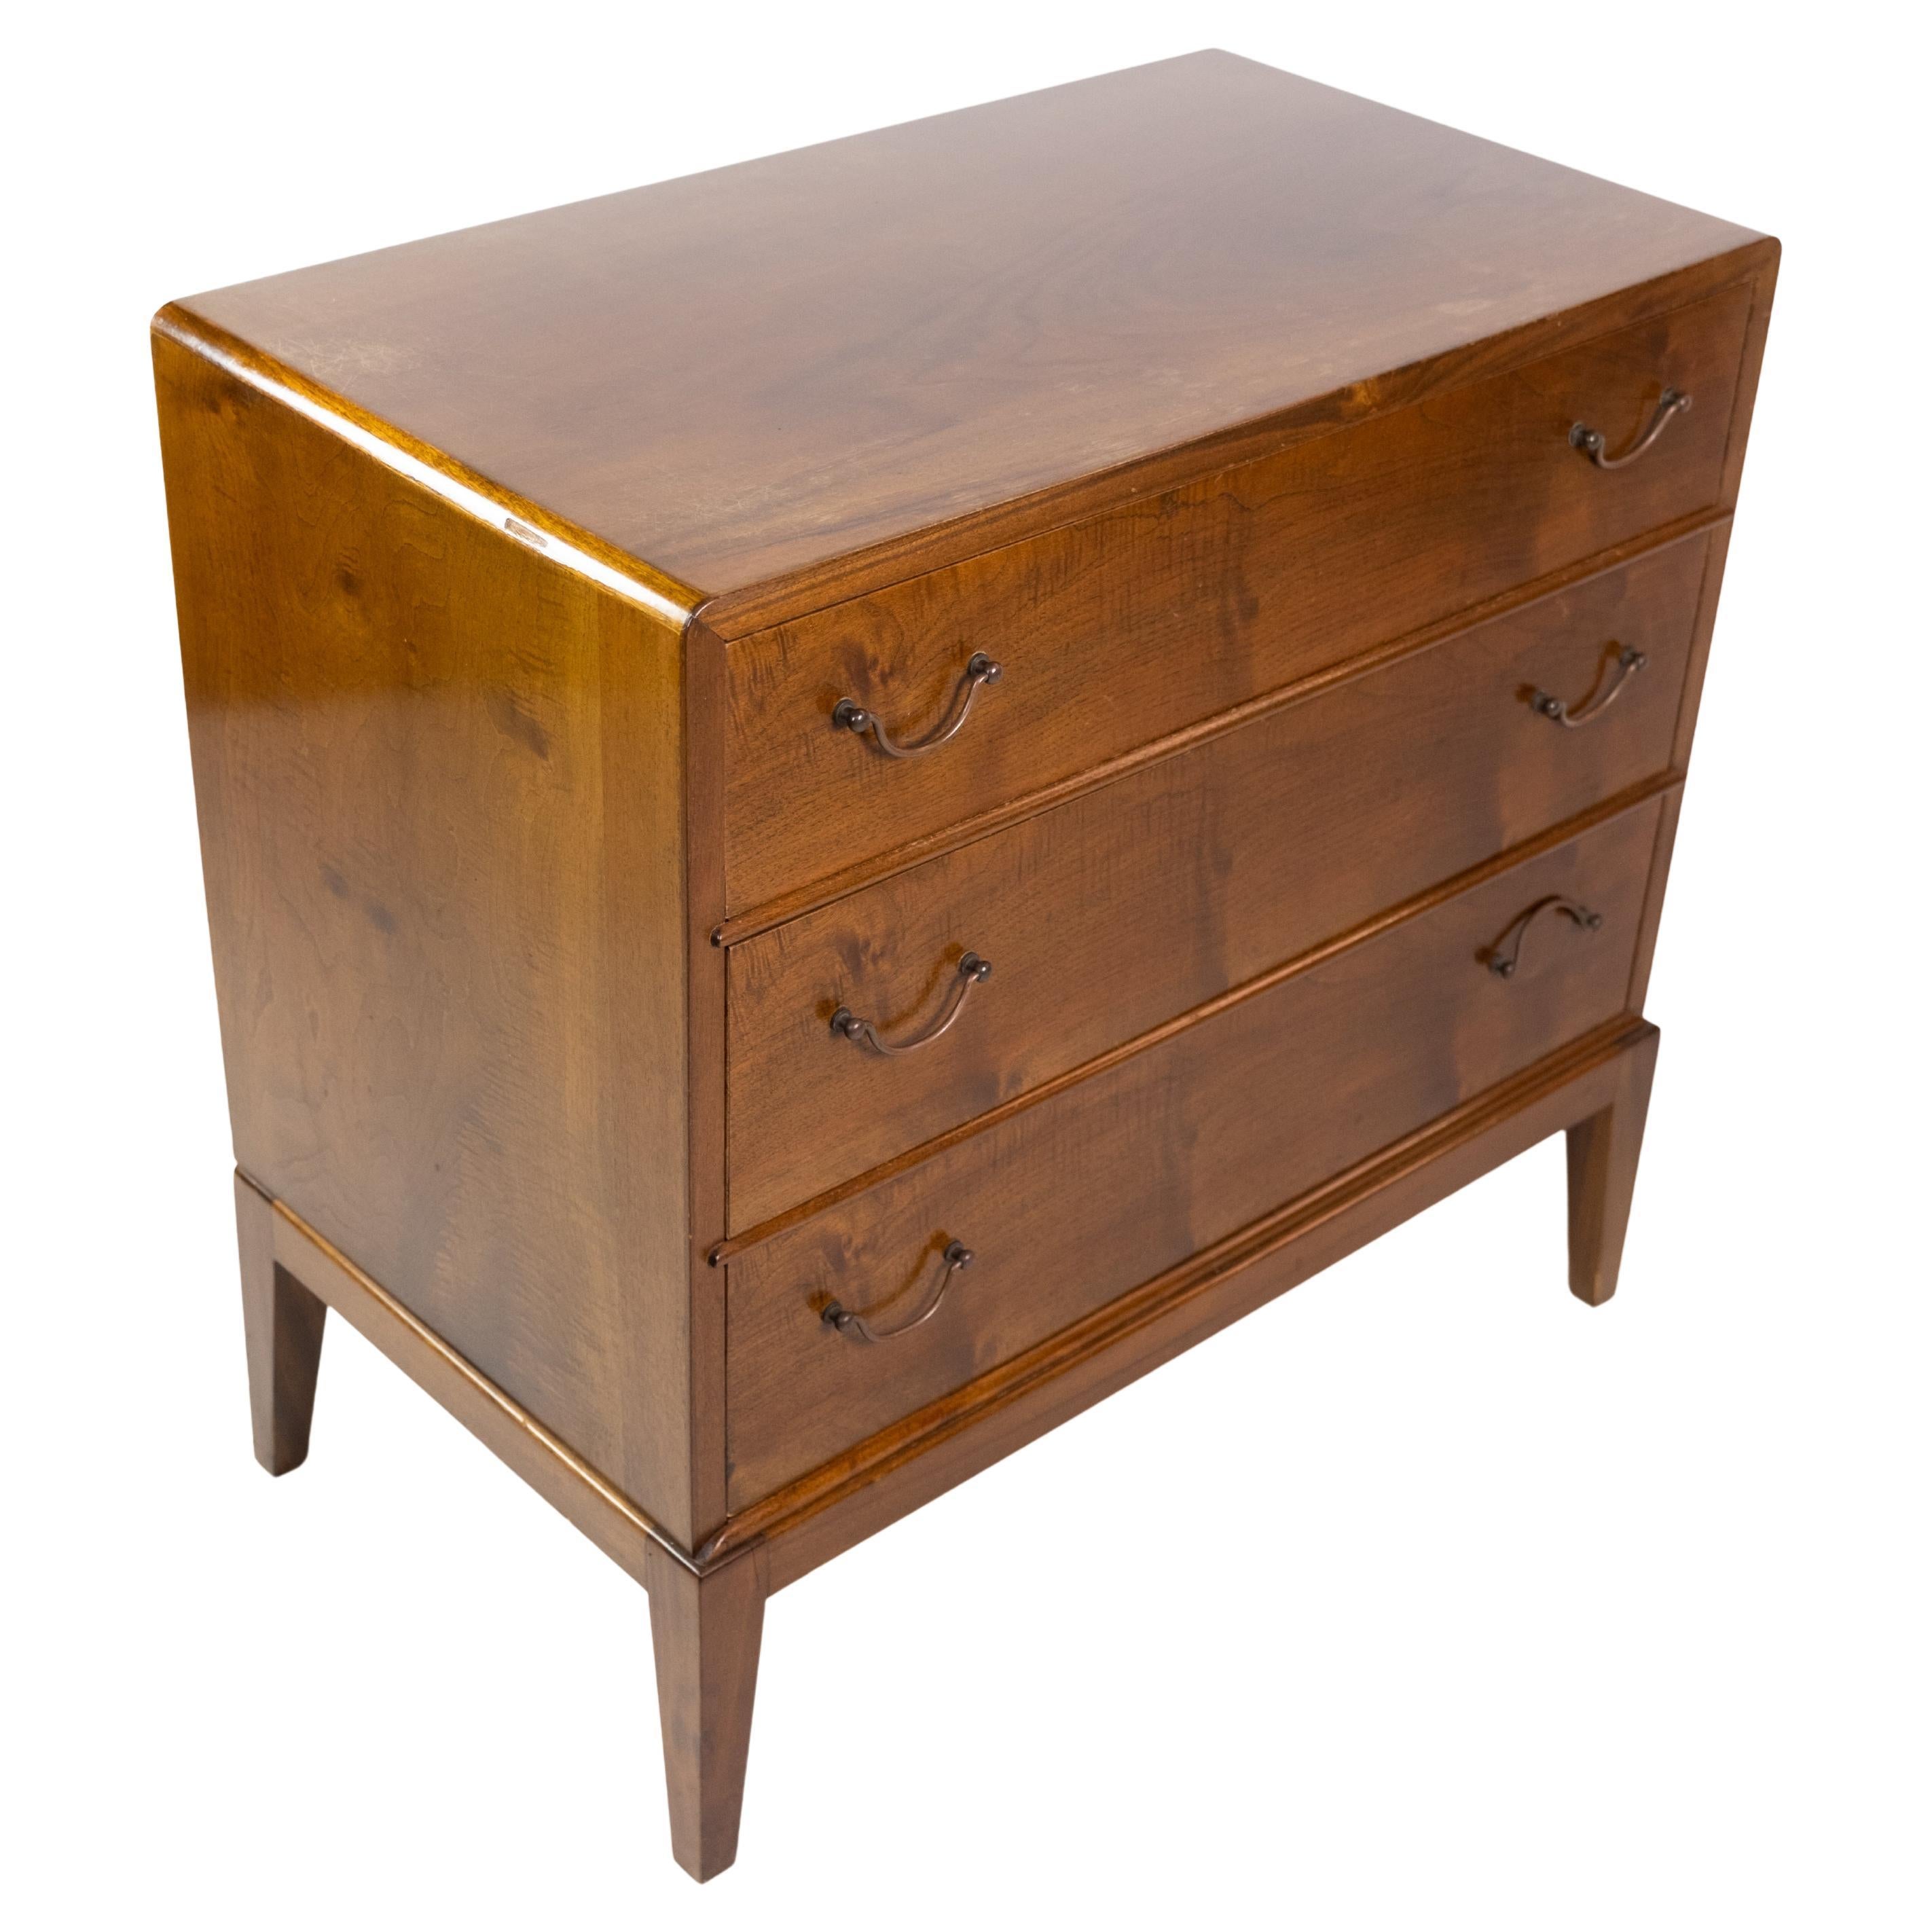 Small chest of drawers in walnut with brass handles and 3 drawers in Danish design from the 1960s.

This product will be inspected thoroughly at our professional workshop by our educated employees, who assure the product quality.